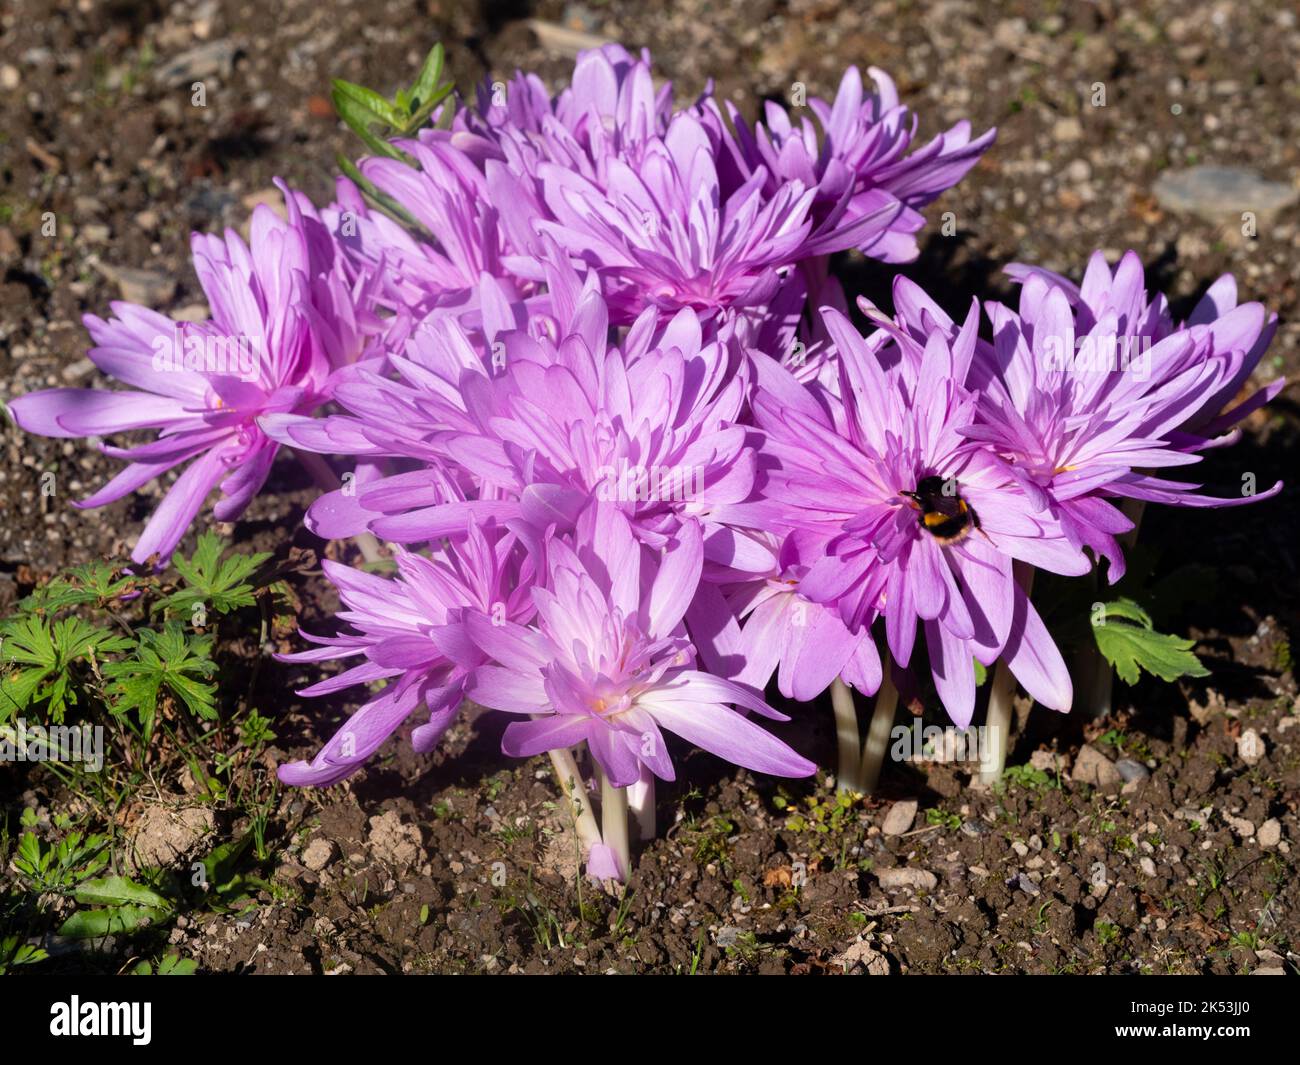 Group of the lilac coloured double flowers of the autumn blooming hardy bulb, Colchicum 'Waterlily' Stock Photo